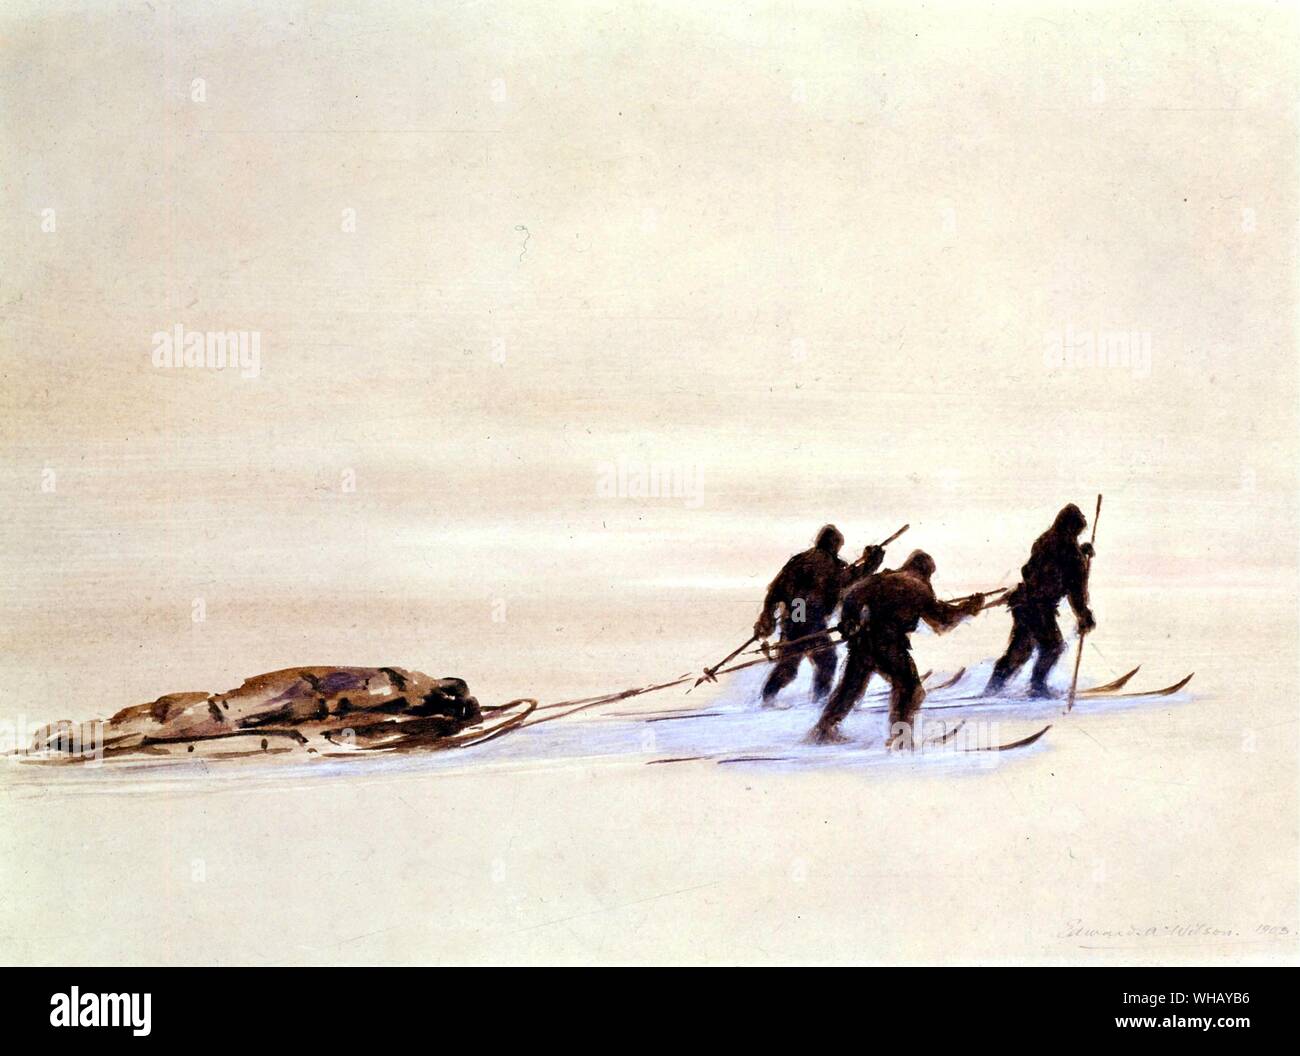 Sledge hauling on skis on a grey day on the Great Ice Barrier, by Edward Wilson (1872-1912). Terra Nova Expedition (1910-1913). Antarctica: The Last Continent by Ian Cameron, page 187. Stock Photo